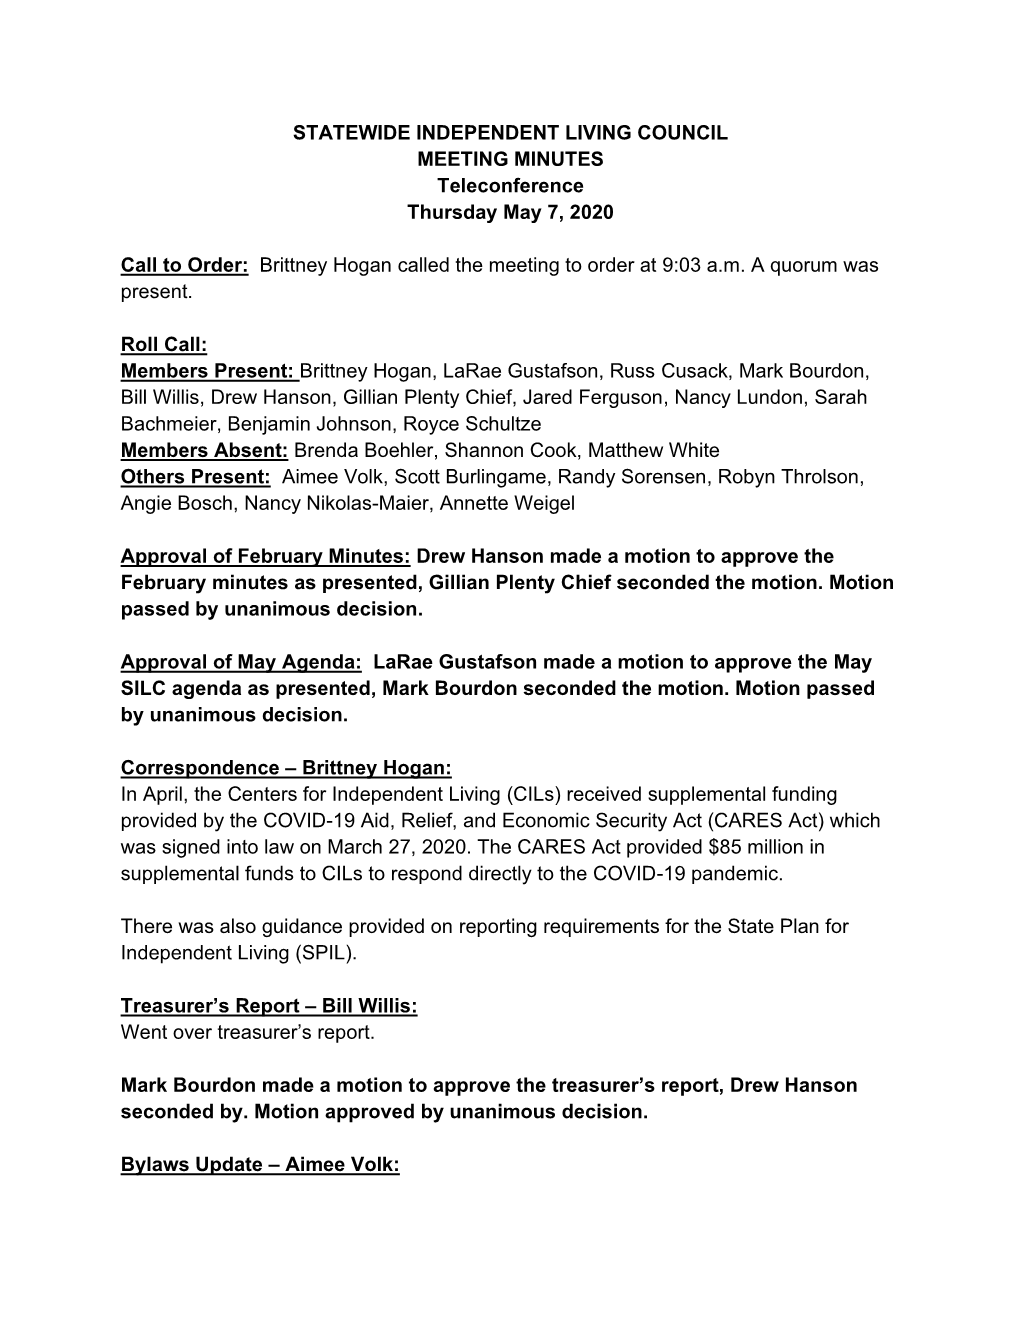 STATEWIDE INDEPENDENT LIVING COUNCIL MEETING MINUTES Teleconference Thursday May 7, 2020 Call to Order